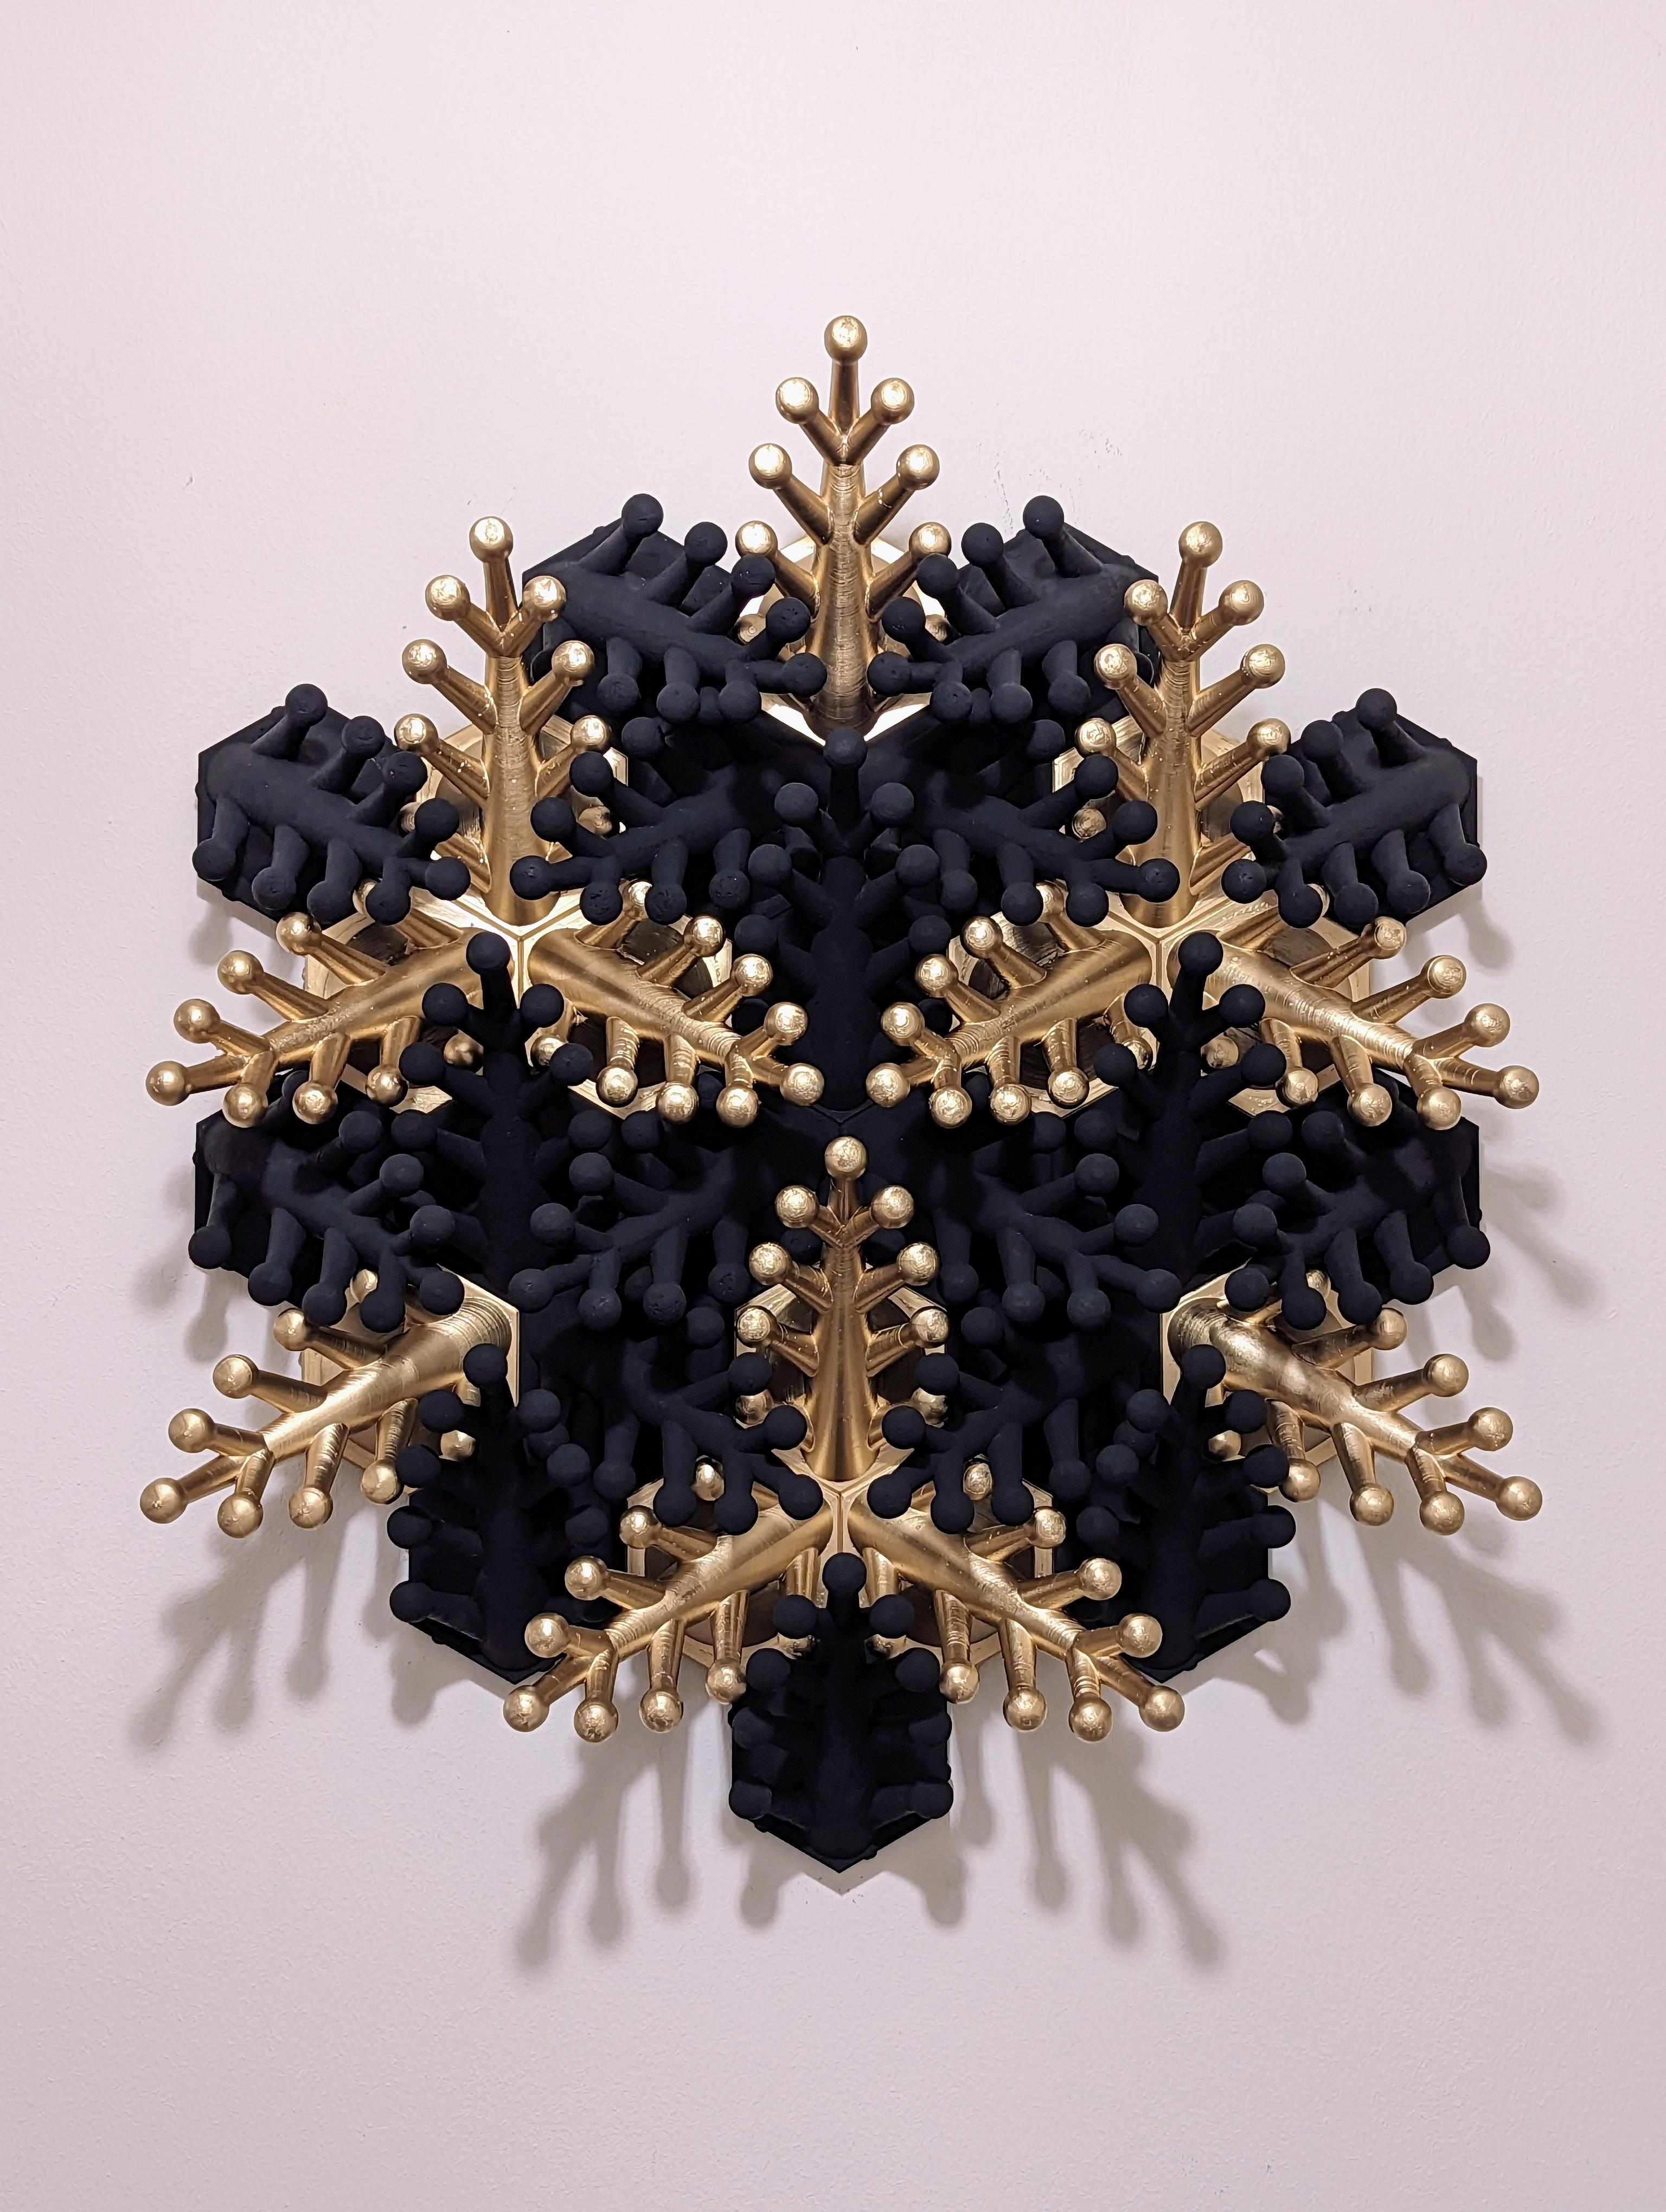 Coral Snowflake Wall Sculpture - My interpretation of Herschel's amazing work. Wanted to go for extremes of contrast, so mixed bright metallic gold spray paint and Stuart Semple's Black 2.0 ultra matte acrylic paint.  - 3d model